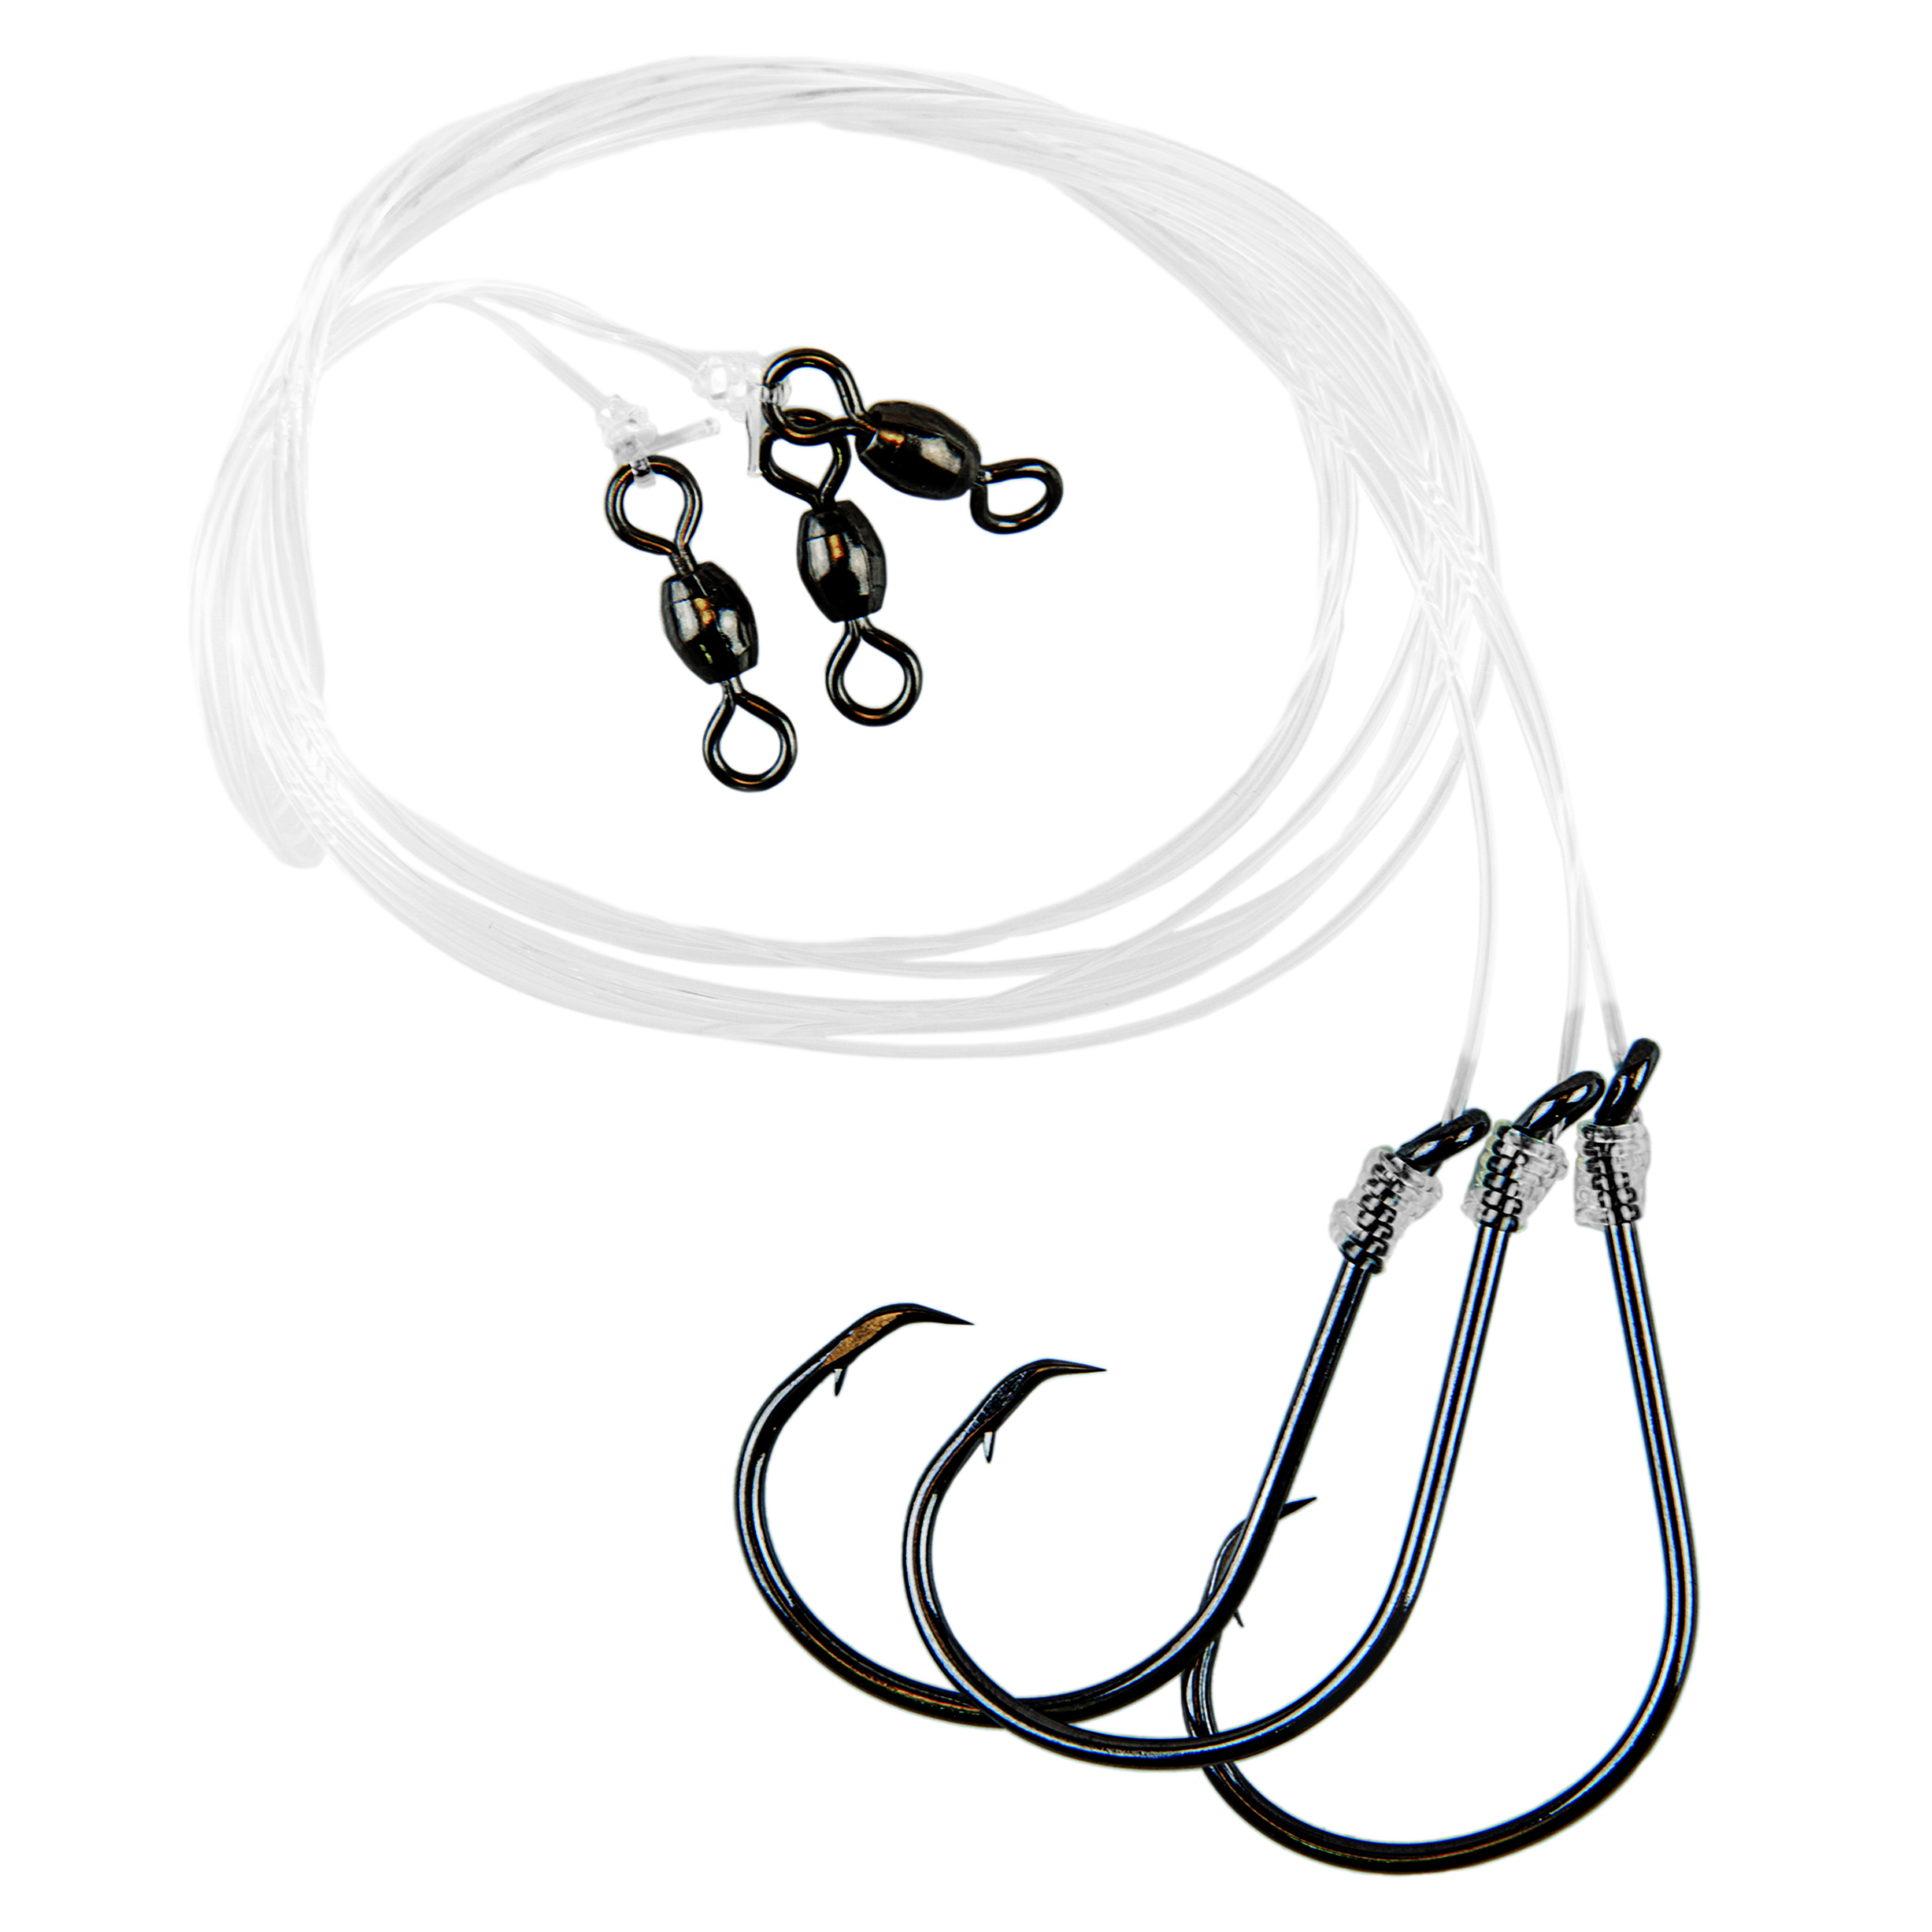 Product Spotlight: Eagle Claw Lazer Sharp Circle Hook Rigs - The